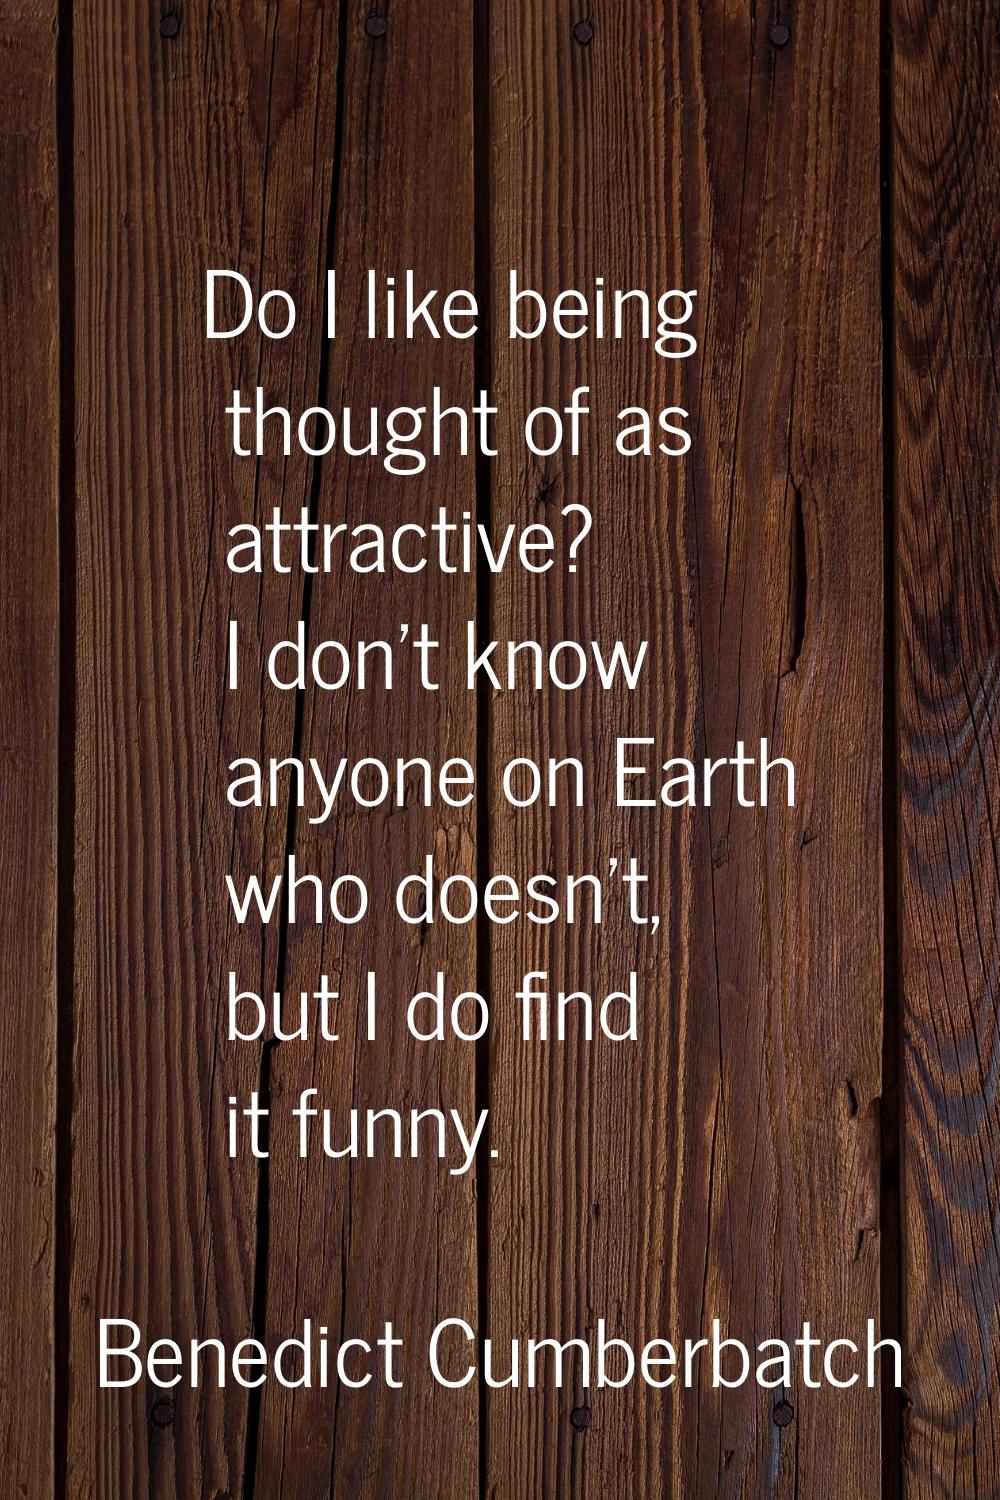 Do I like being thought of as attractive? I don't know anyone on Earth who doesn't, but I do find i